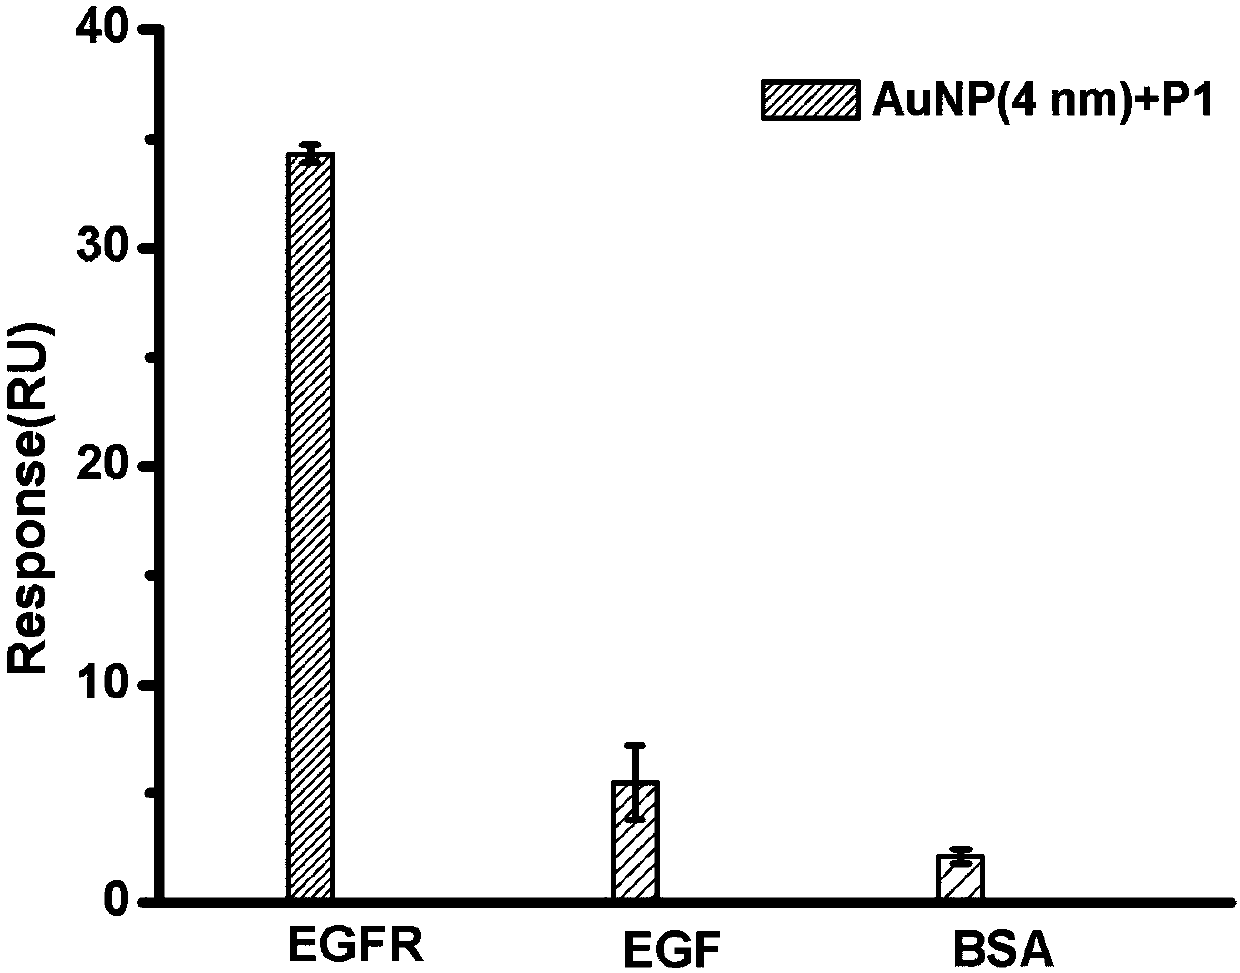 Artificial antibody for targeting EGFR (epidermal growth factor receptor) based on gold nanoparticles and preparation method thereof